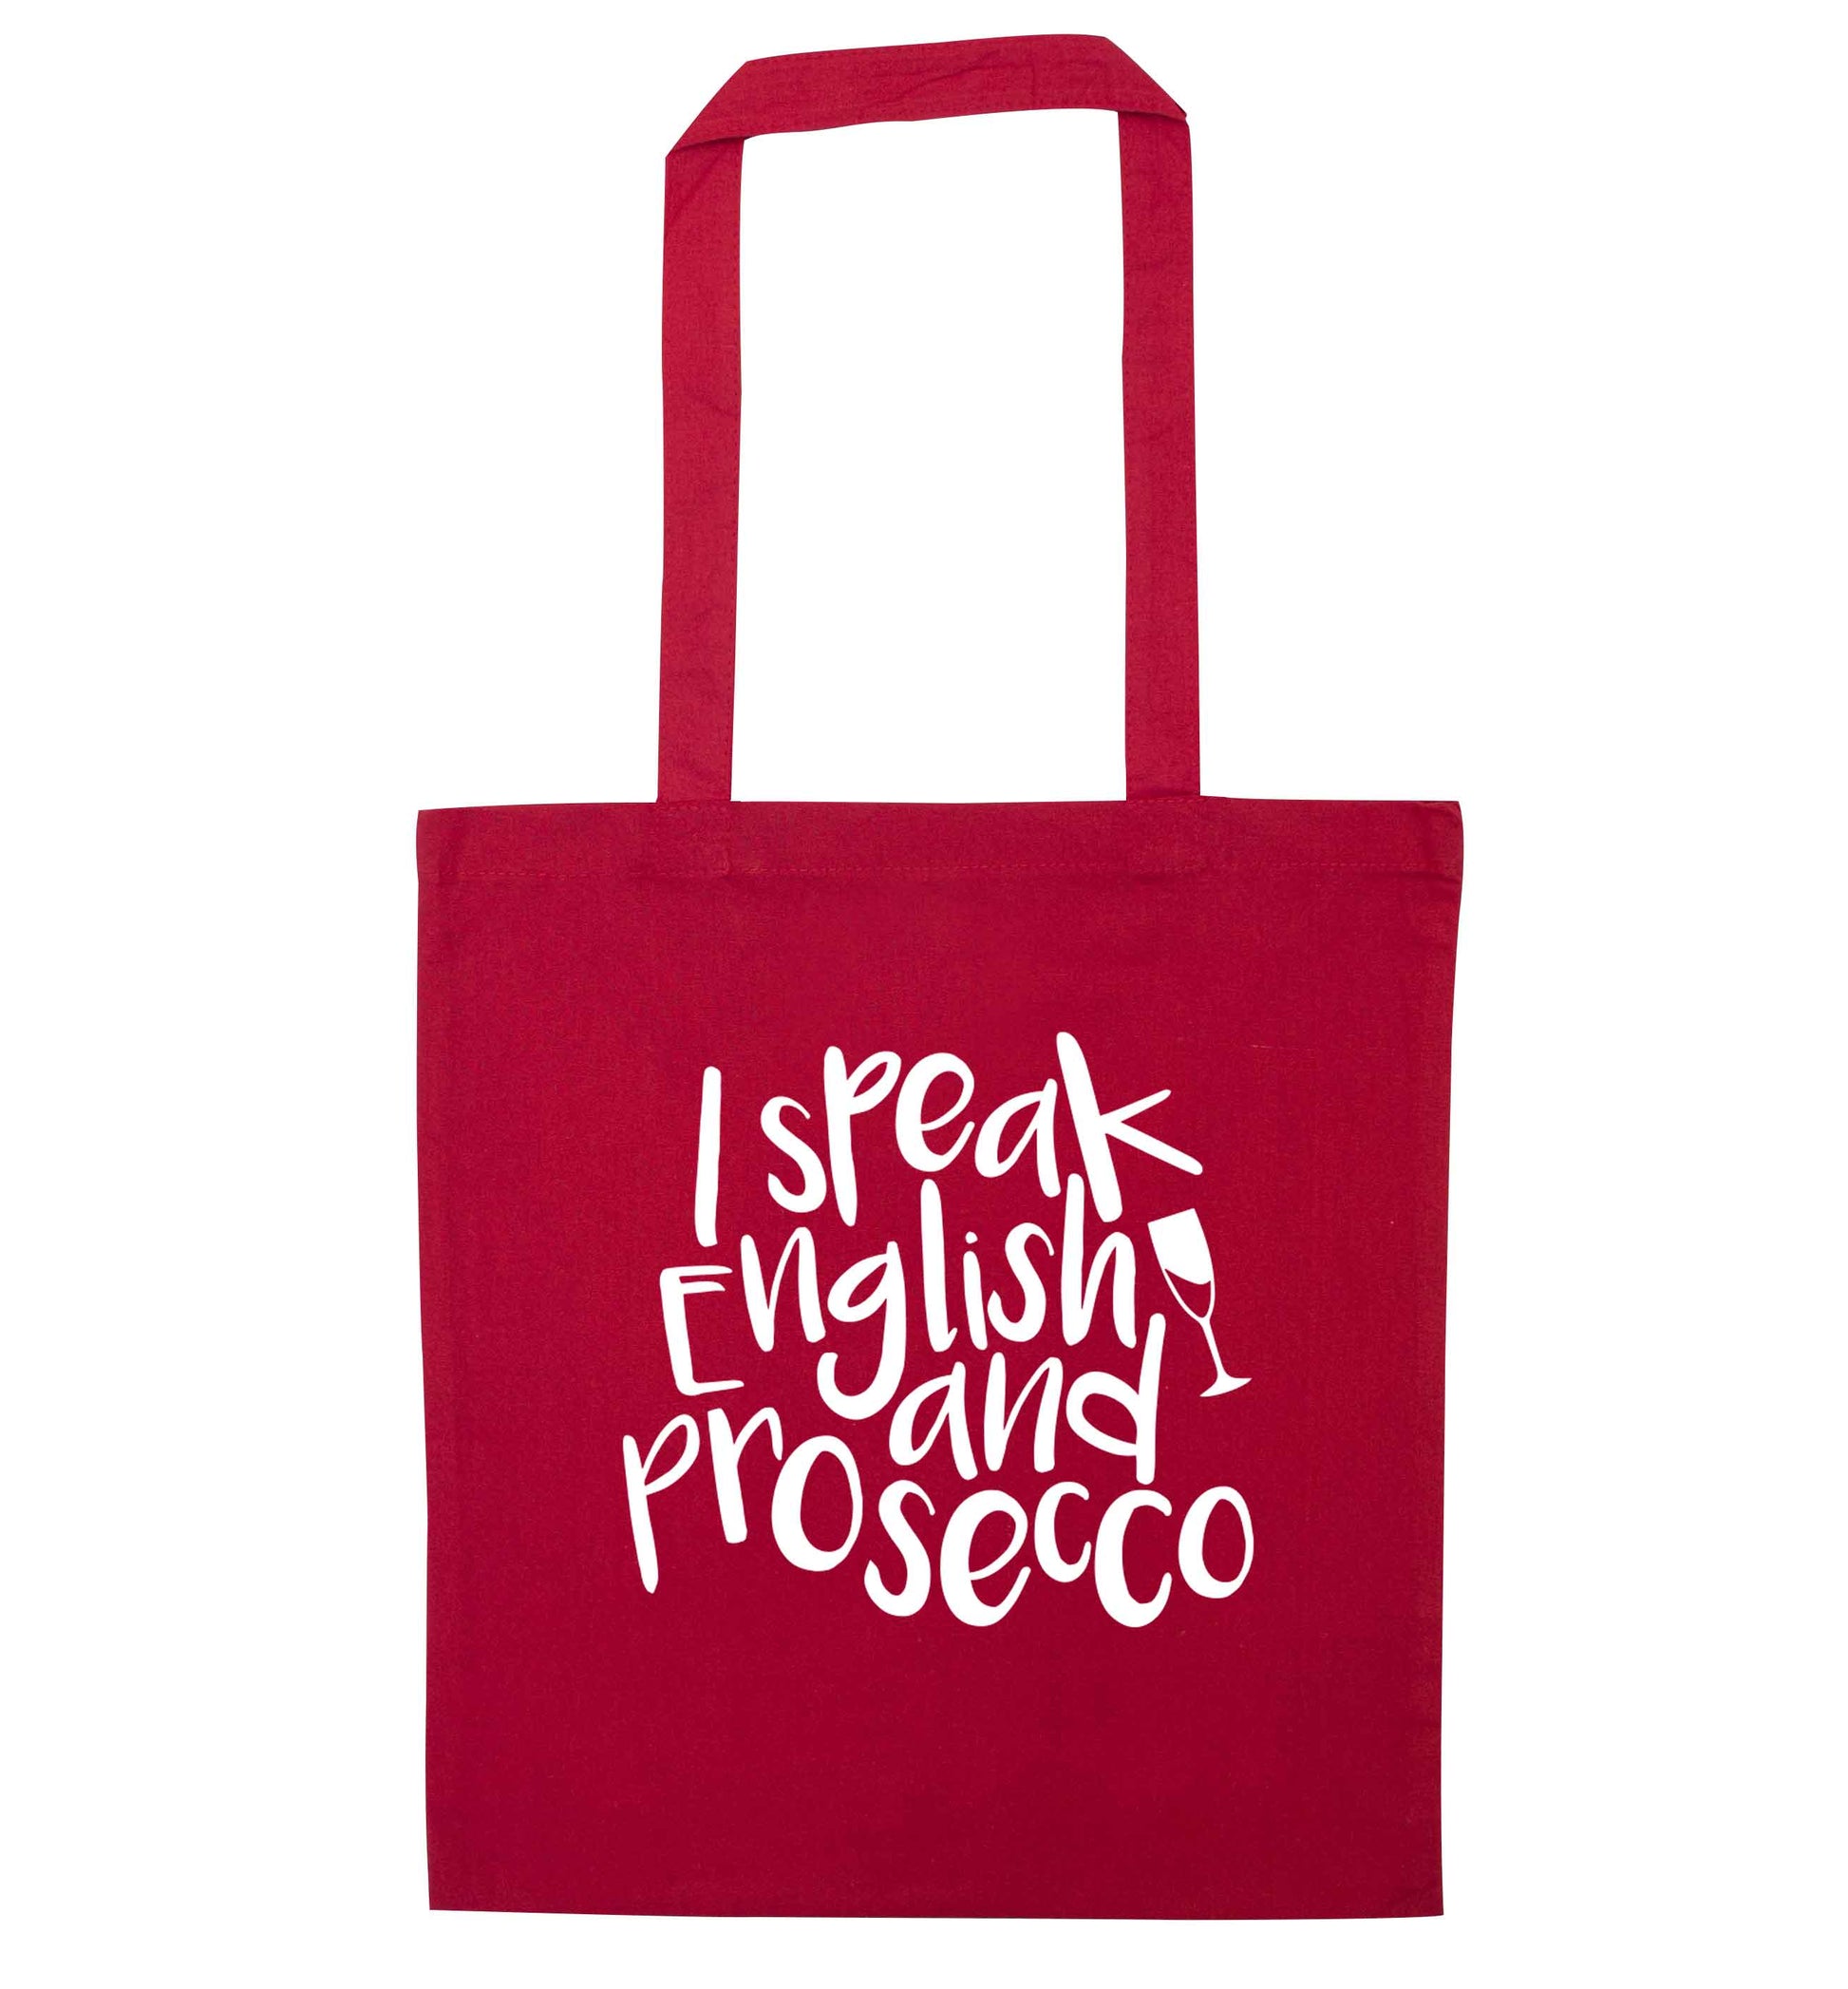 I speak English and prosecco red tote bag